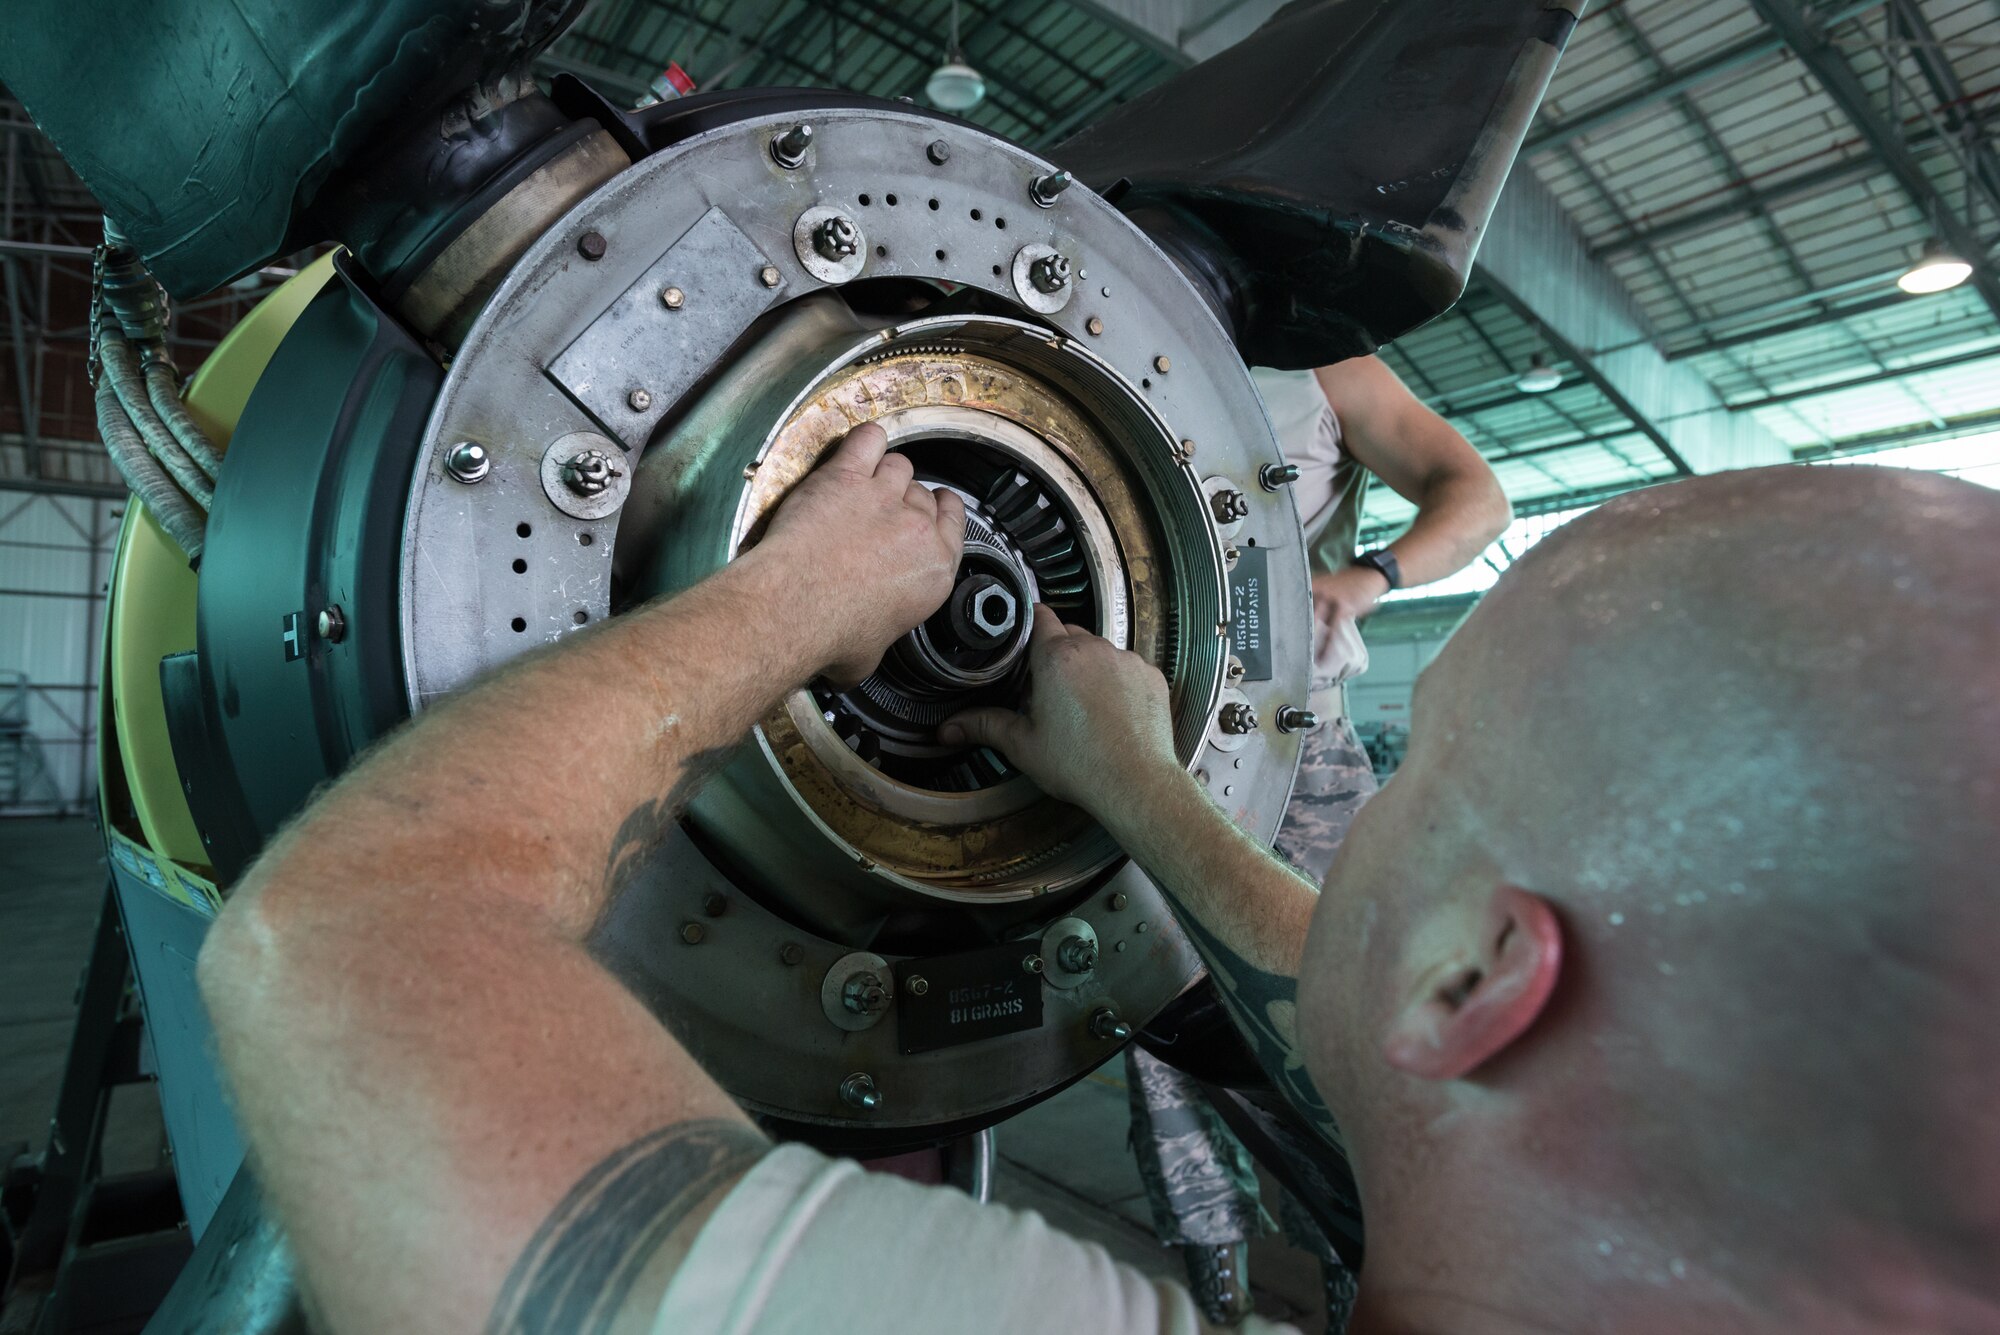 U.S. Air Force Staff Sgt. Michael Marks, a propulsion mechanic from the Kentucky Air National Guard’s 123rd Airlift Wing, mounts a propeller to a C-130 engine at the Air National Guard’s Air Dominance Center in Savannah, Ga., June 15, 2016. Marks is attending Maintenance University here, a weeklong course designed to provide intensive instruction in aircraft maintenance. Now in its eighth year, Maintenance University is sponsored by the 123rd Airlift Wing. (U.S. Air National Guard photo by Lt. Col. Dale Greer)